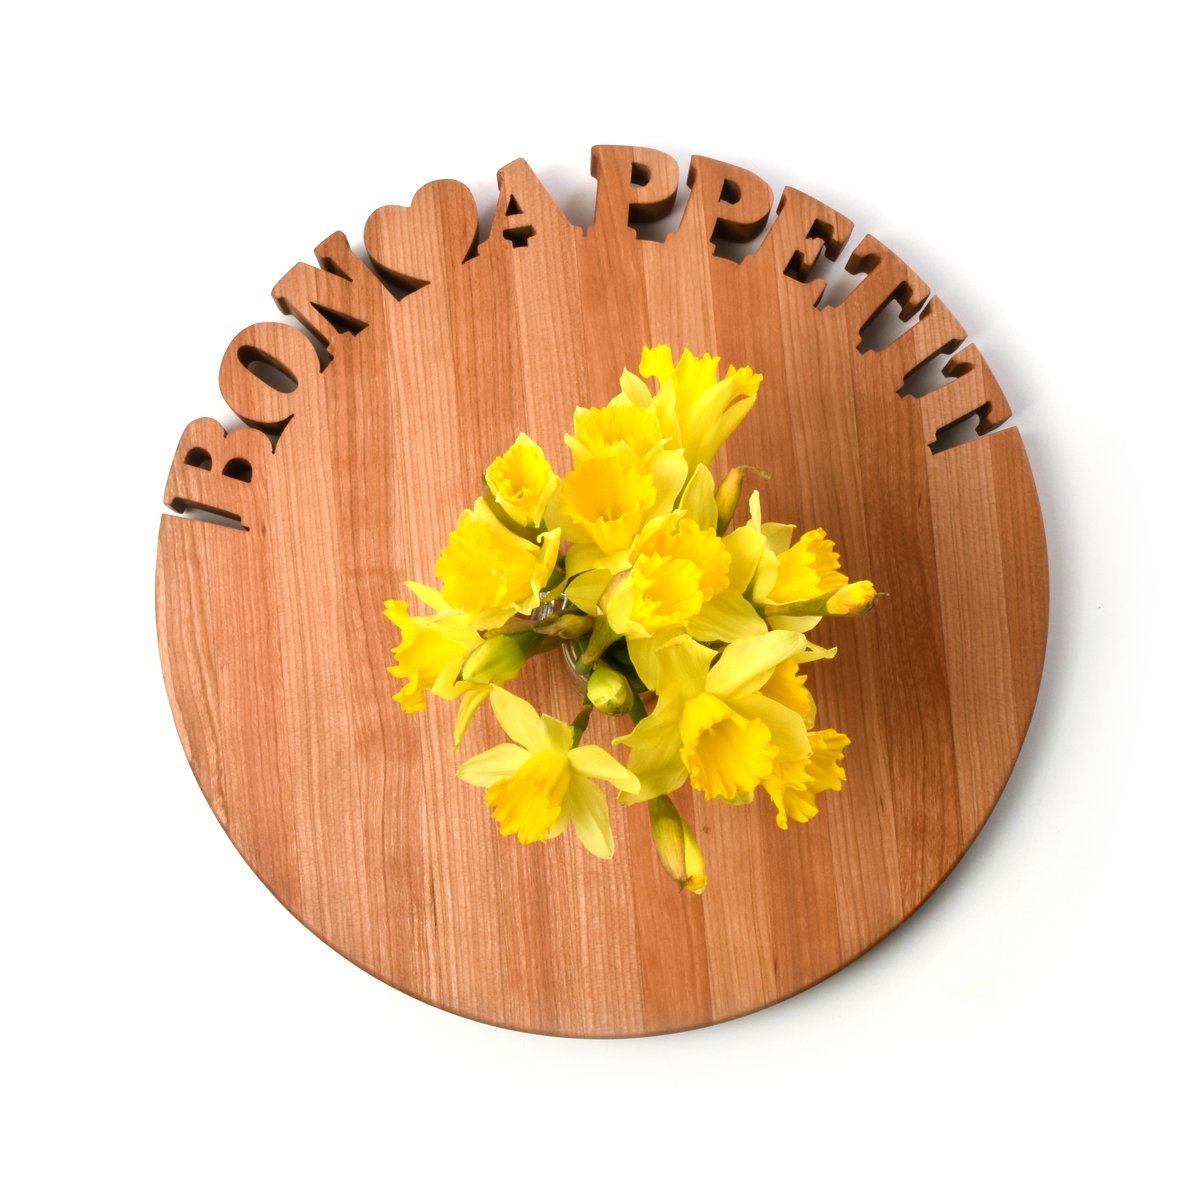 Personalized Round Wood Cutting Board